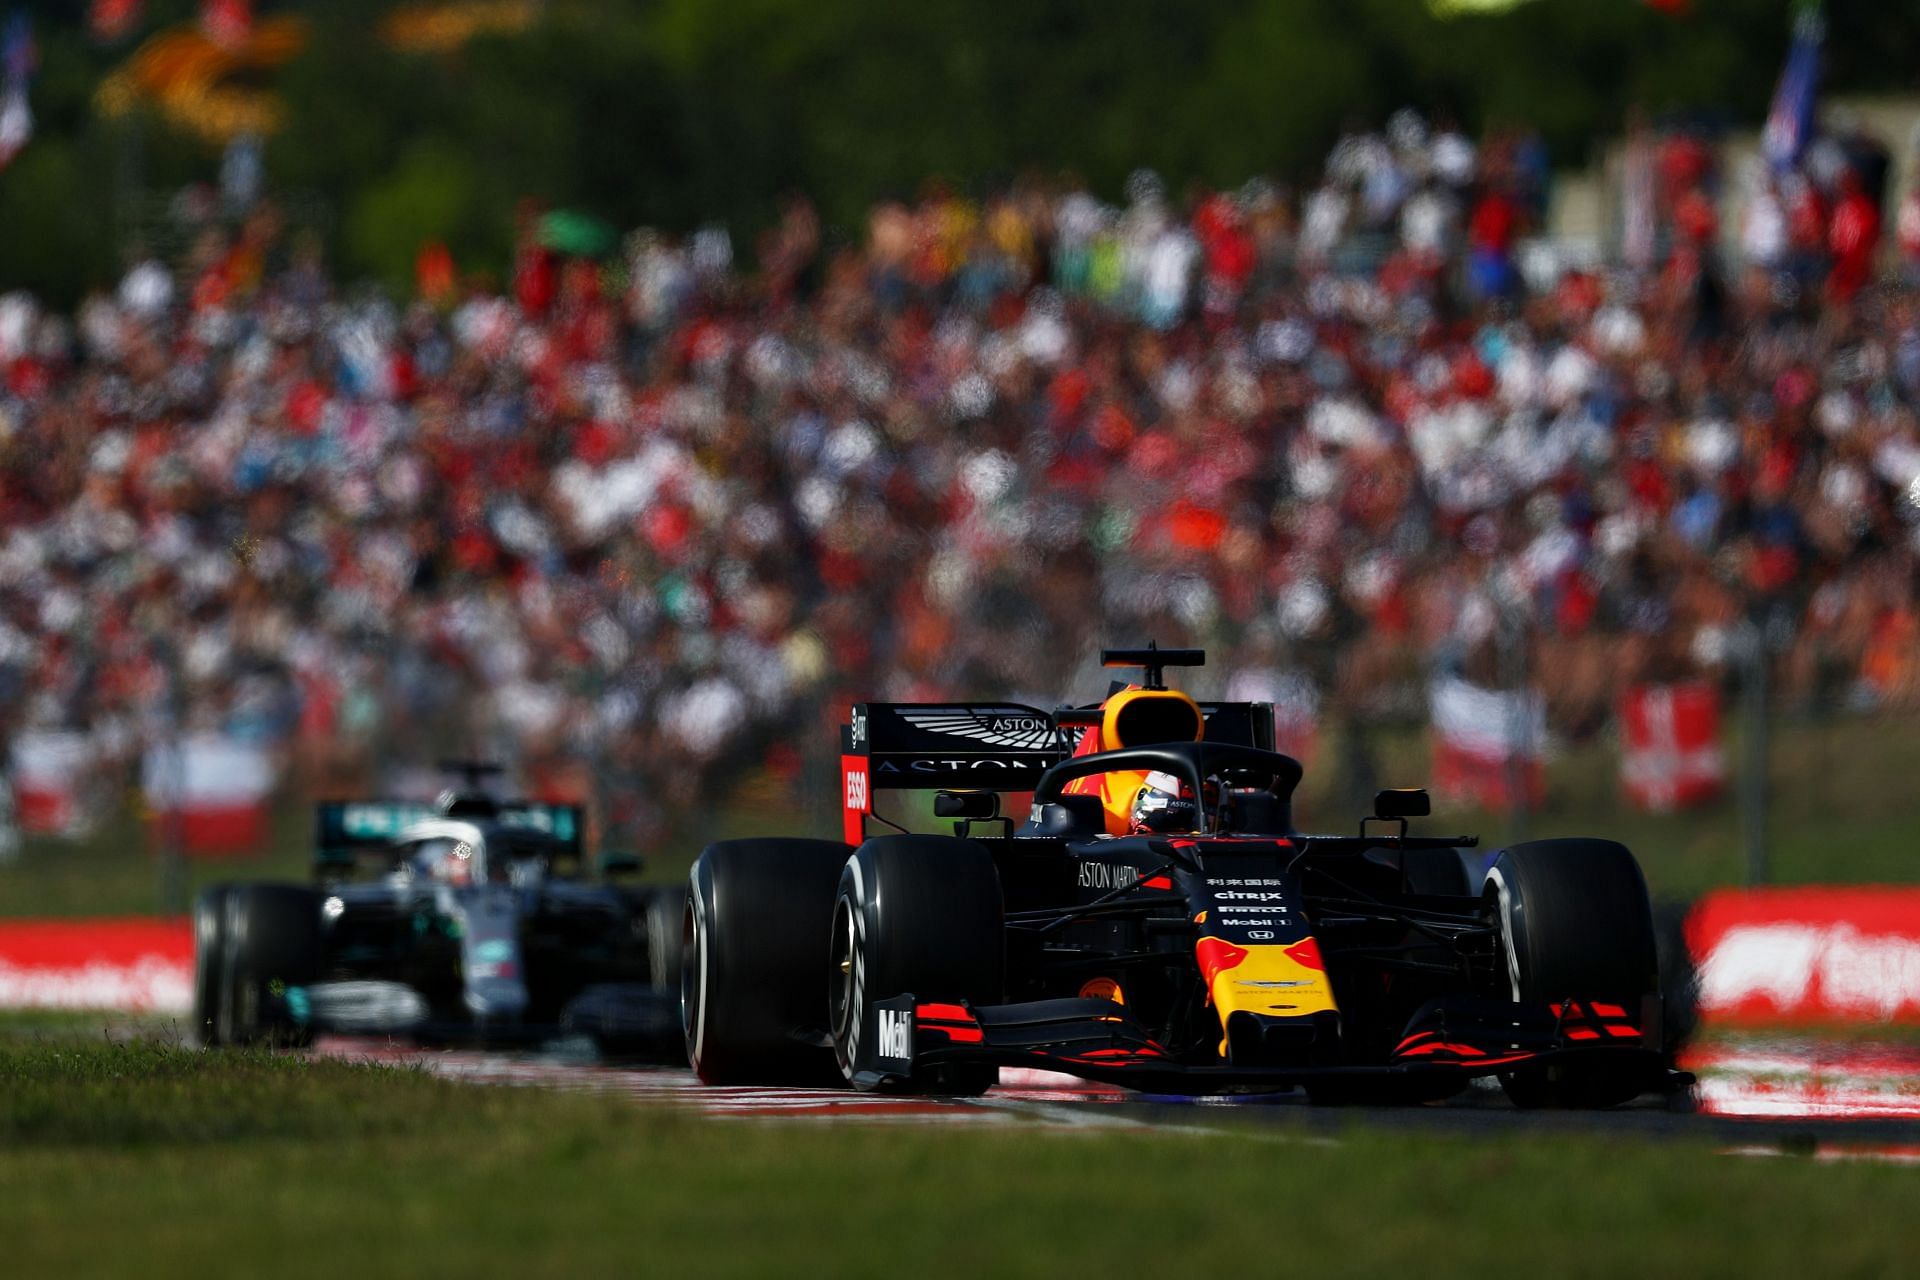 F1 Grand Prix of Hungary - Lewis Hamilton chased down Max Verstappen successfully (Photo by Dan Mullan/Getty Images)